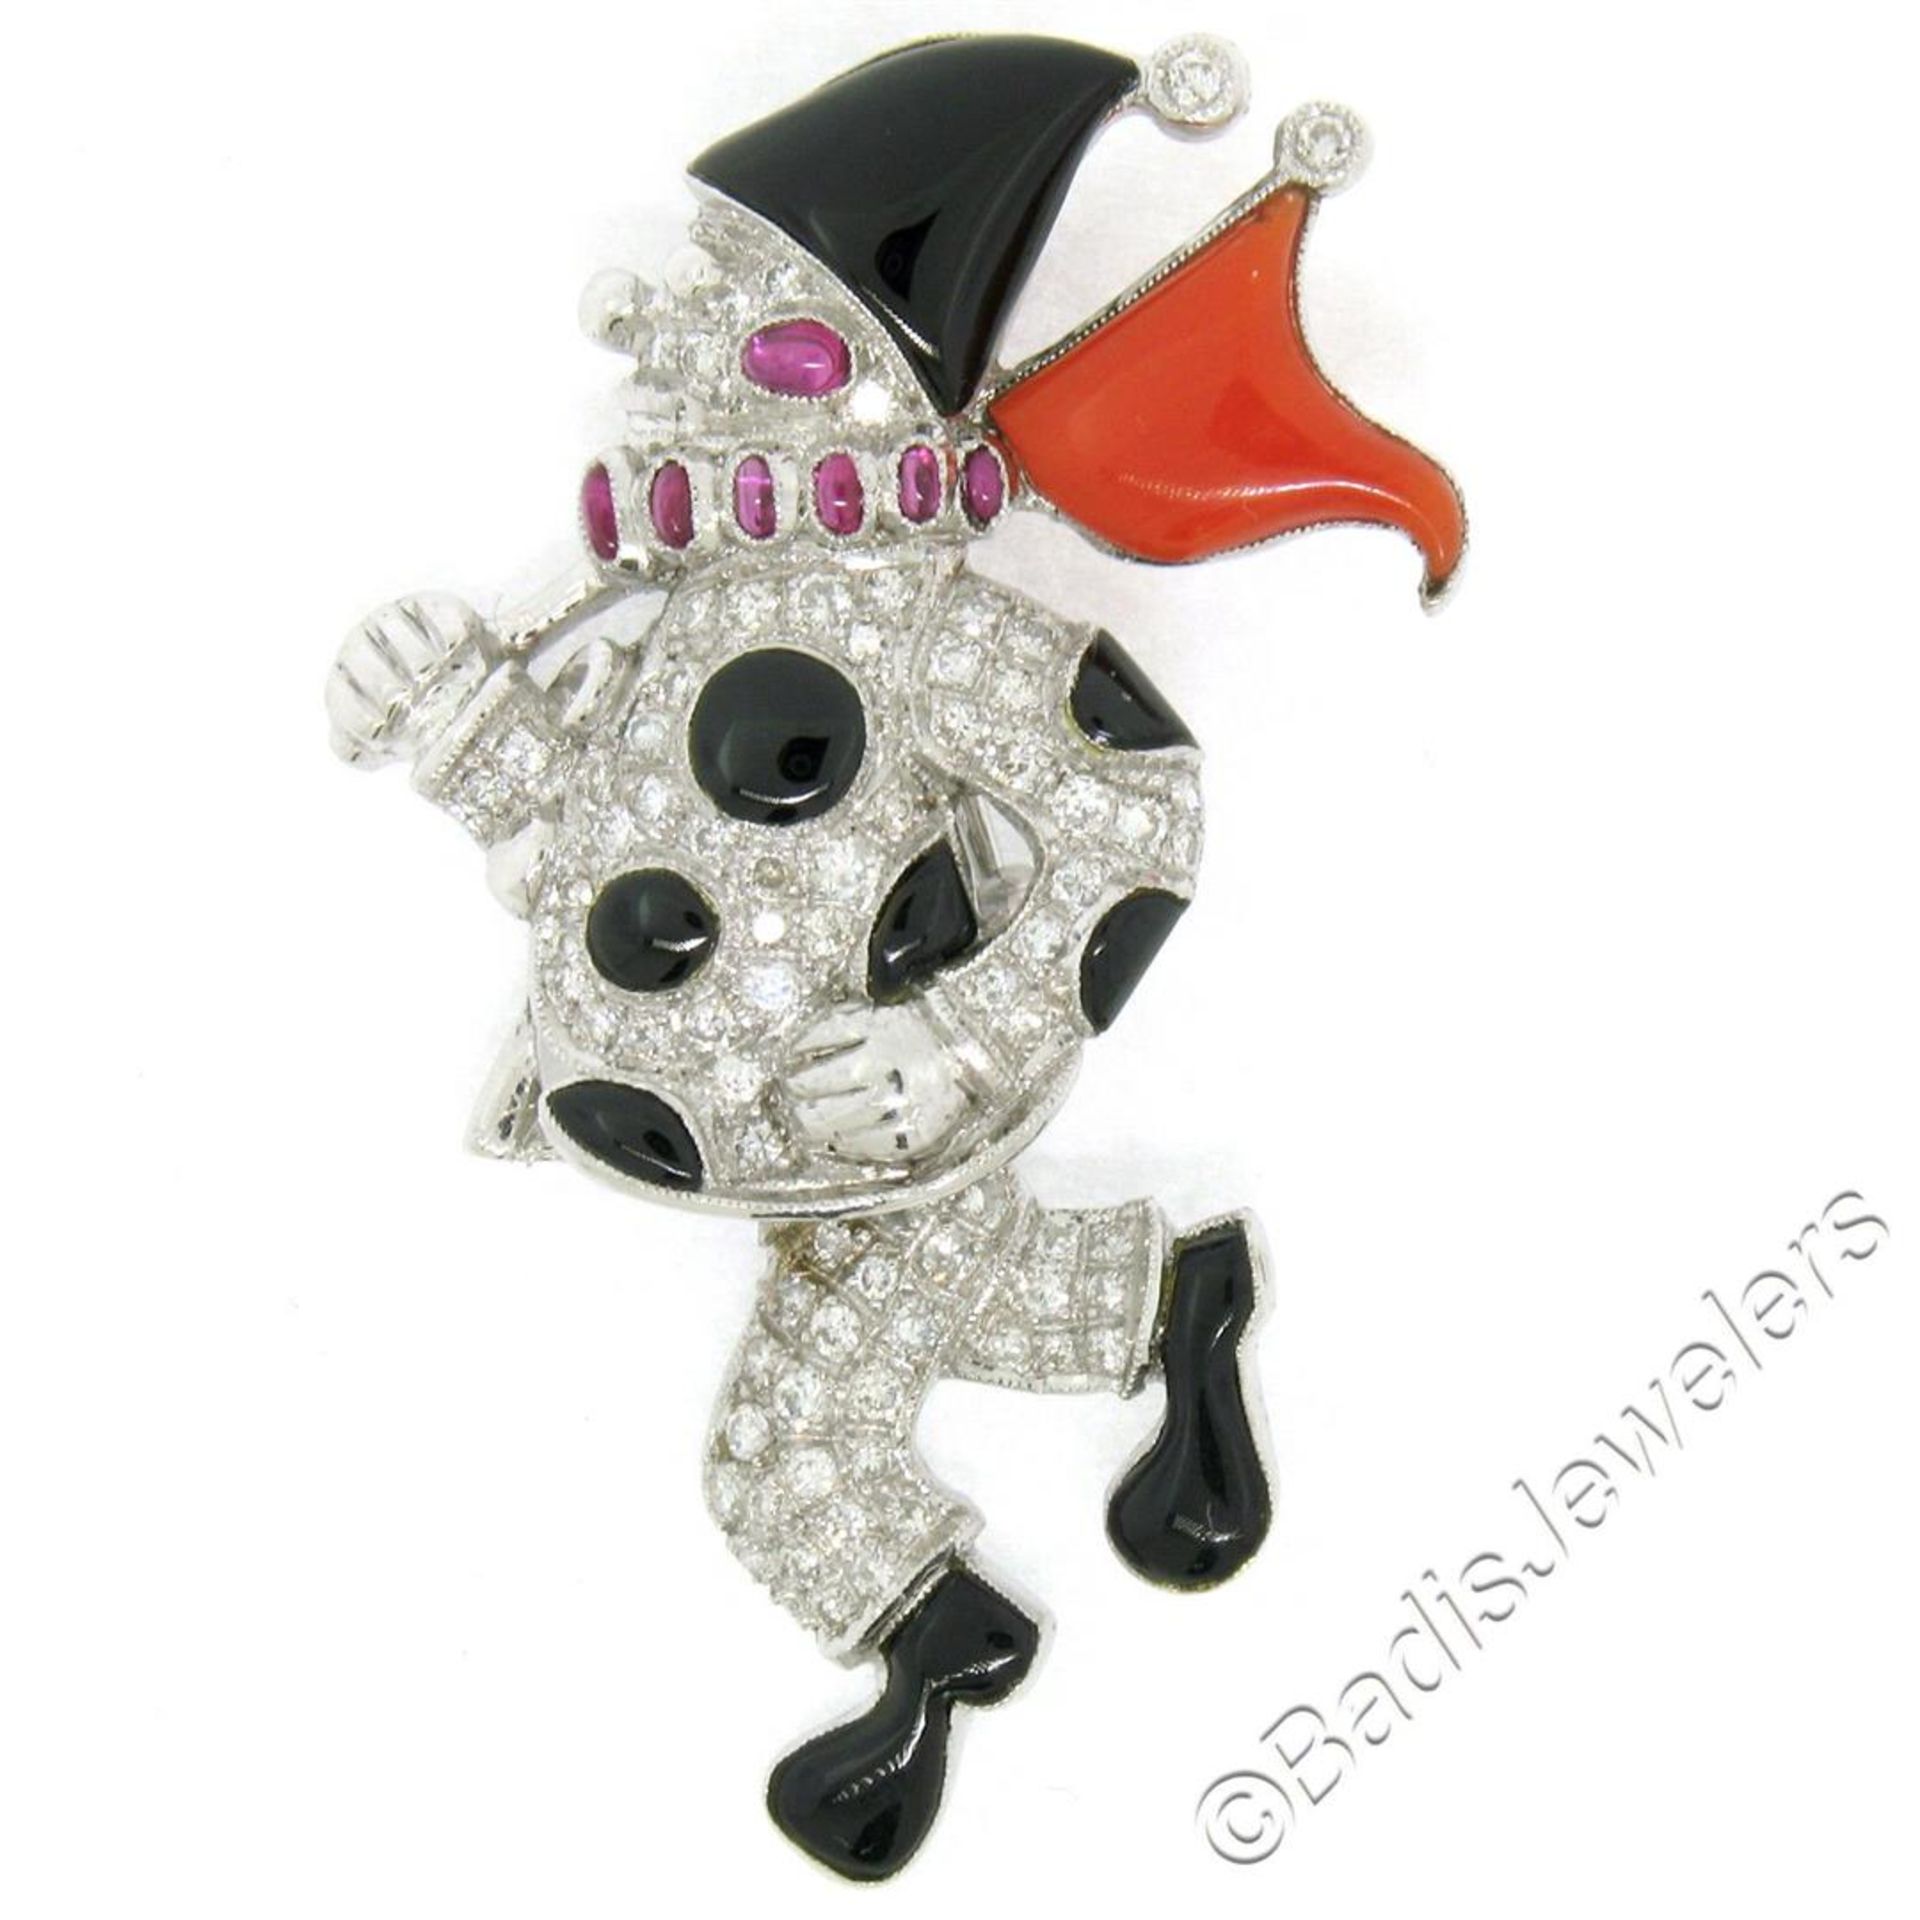 Vintage 18kt White Gold Diamond Black Onyx and Coral Clown Brooch Pin - Image 2 of 7